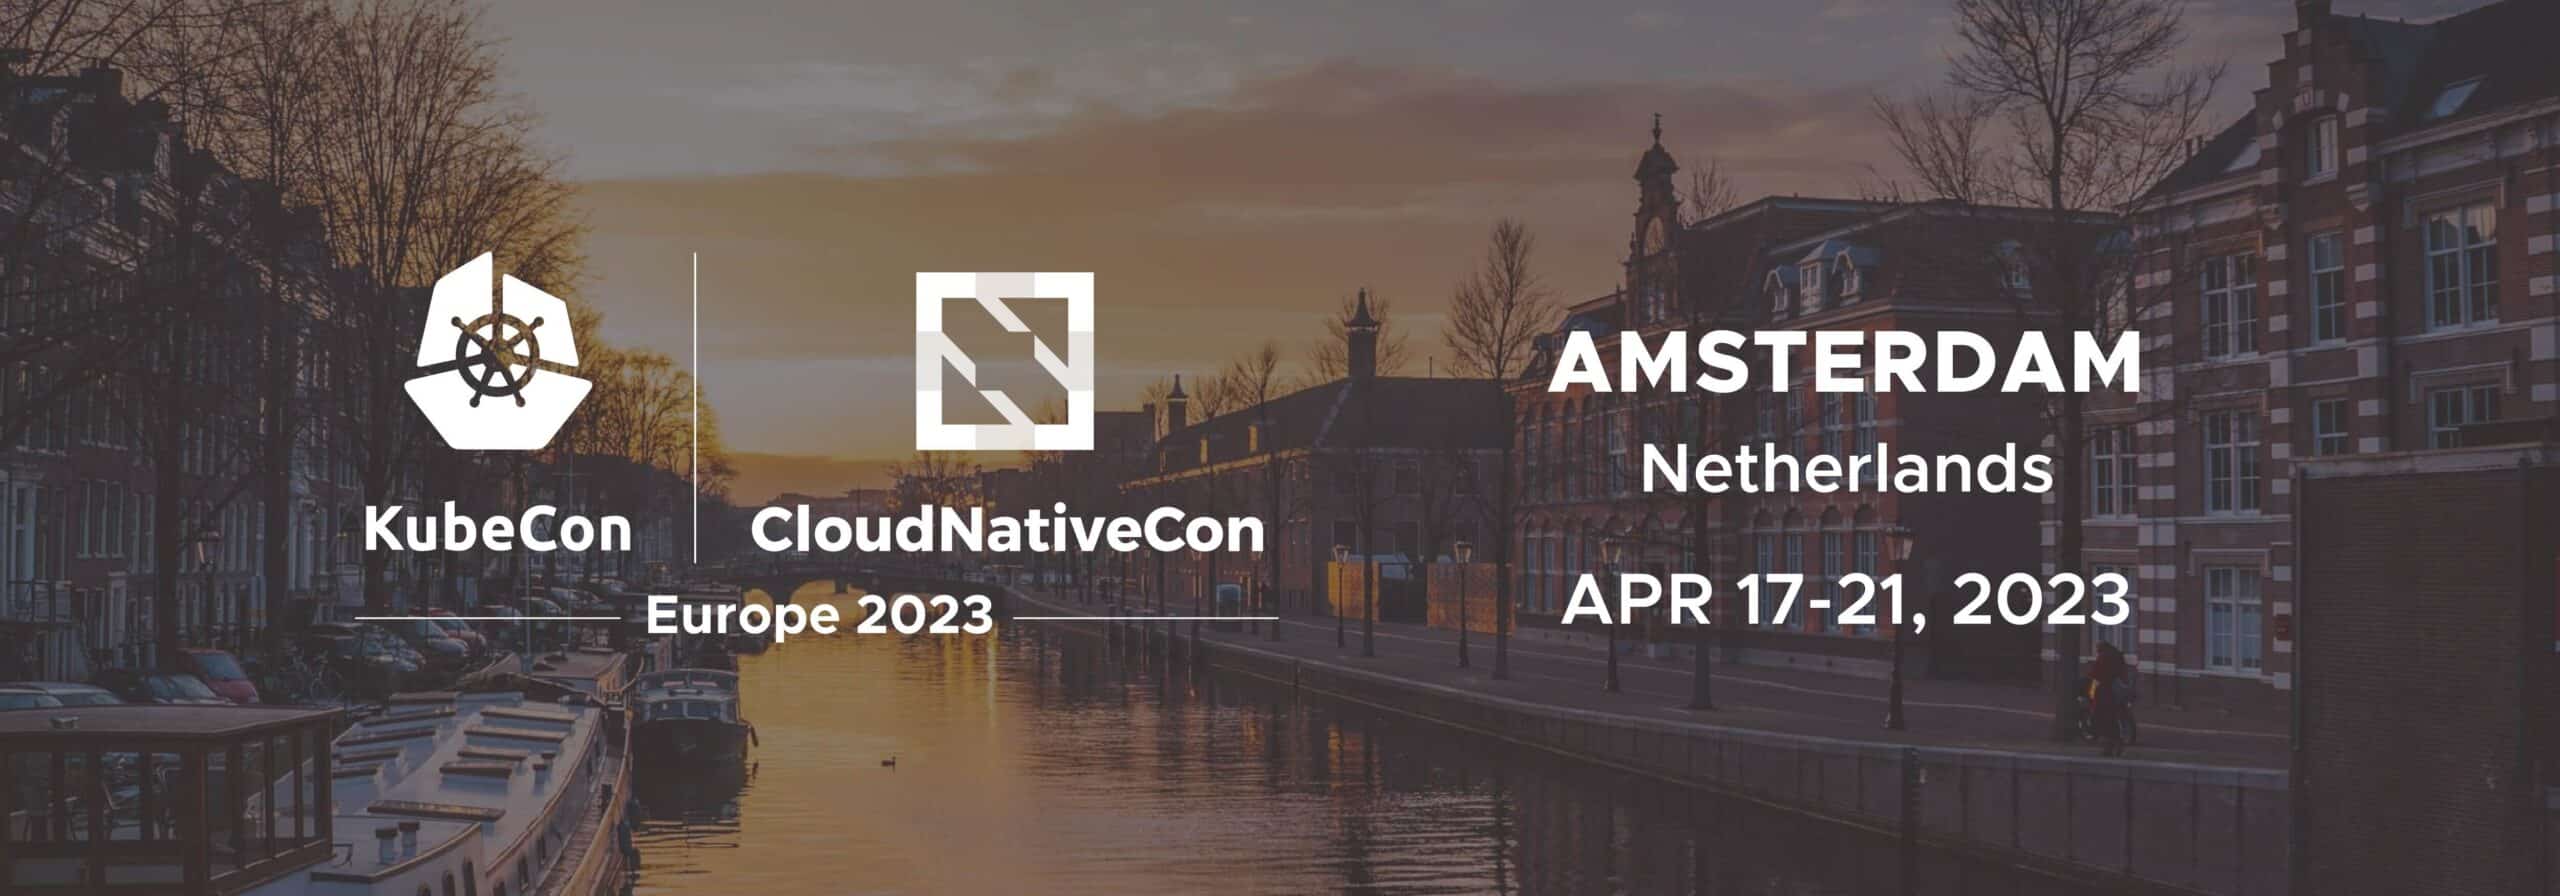 KubeCon + CloudNativeCon Europe 2023 from 17th-21st April